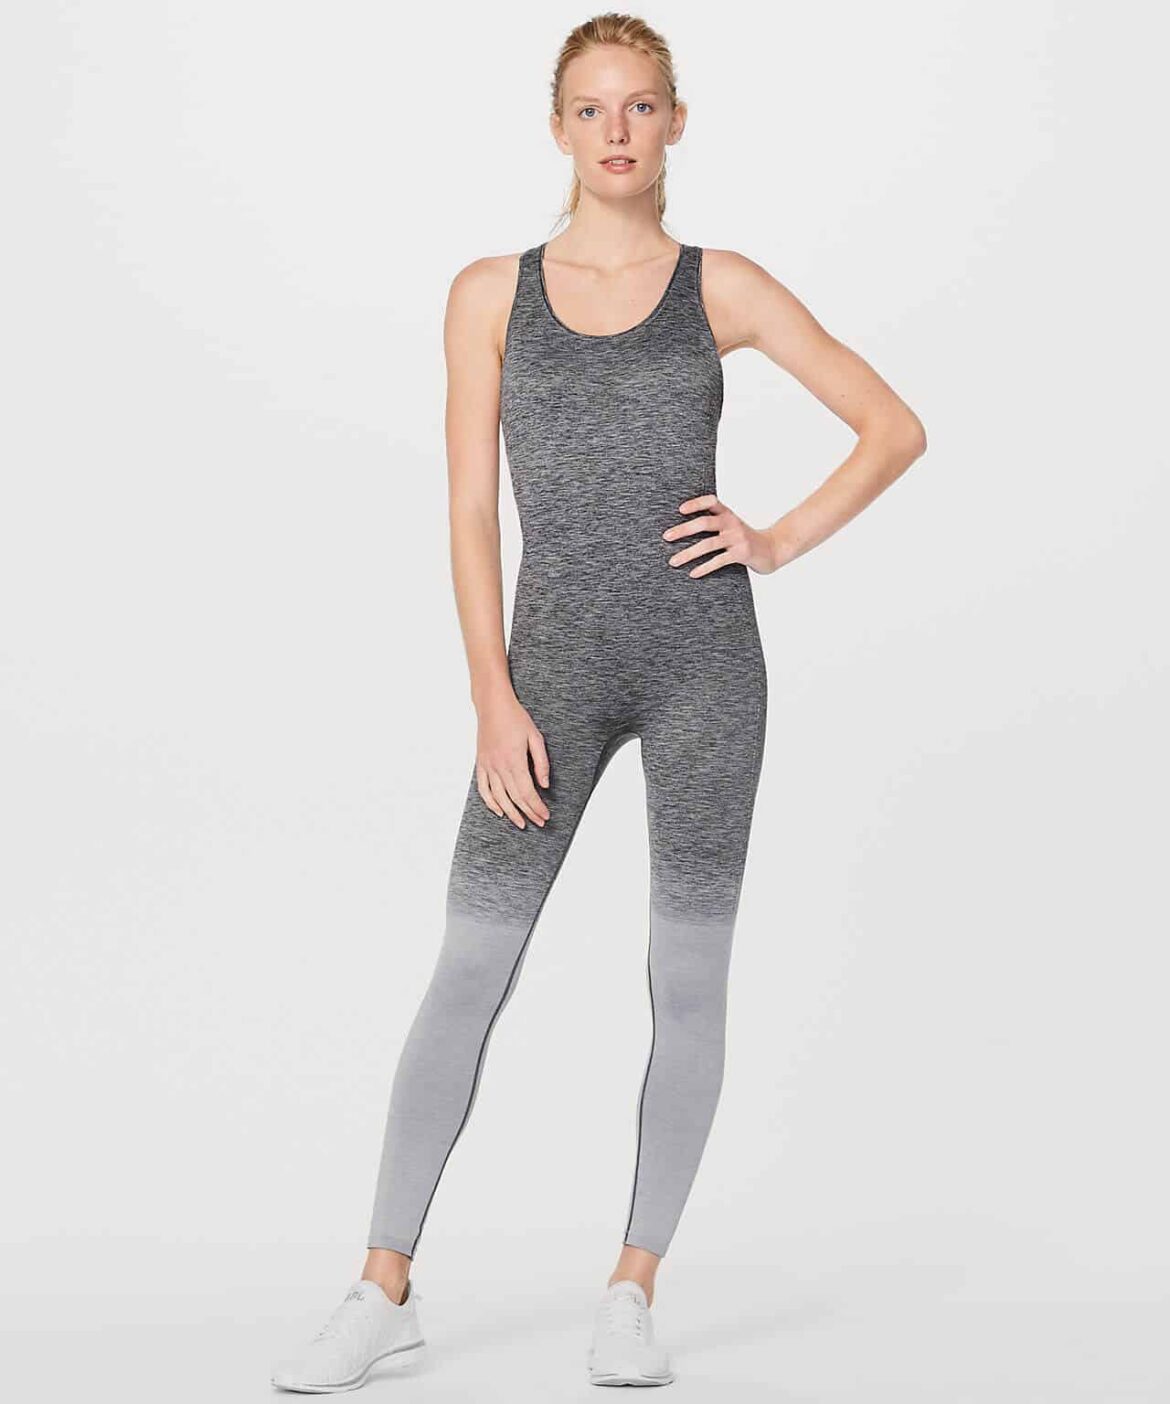 Might As Well Jump! 7 Athletic Jumpsuits to Get You Moving